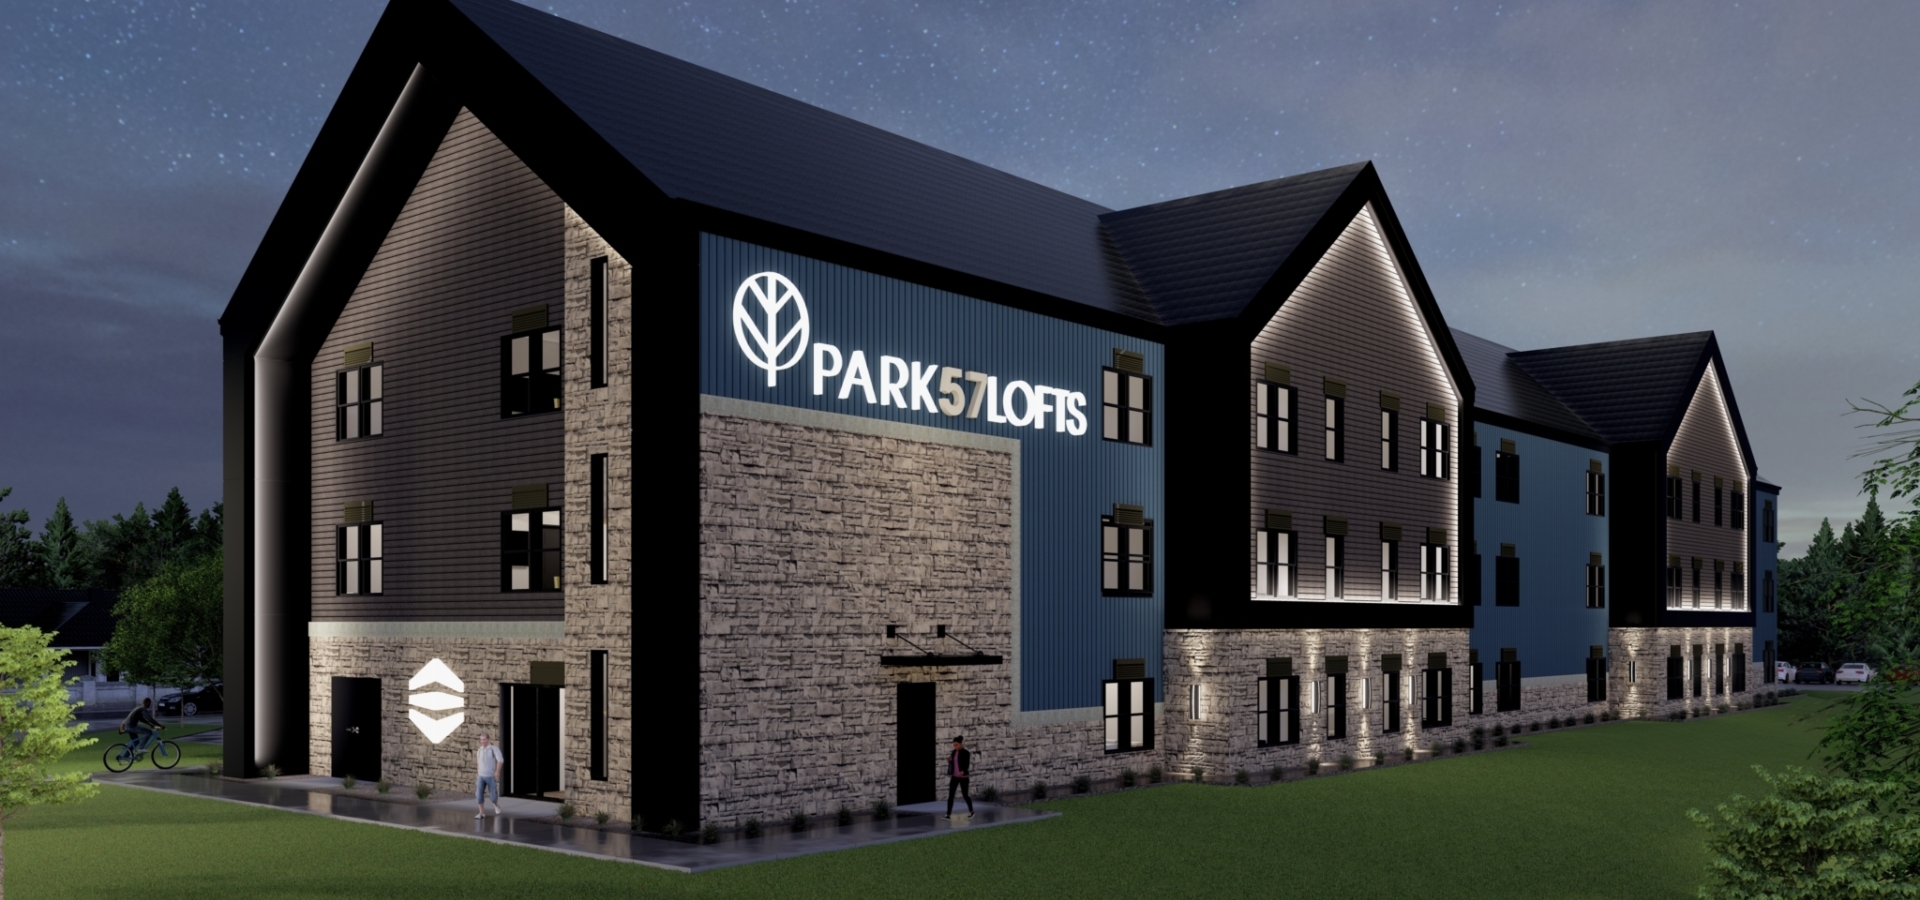 Park 57 Lofts, Studio apartments in Springfield, MO, professionally managed by Entrust Property Solutions